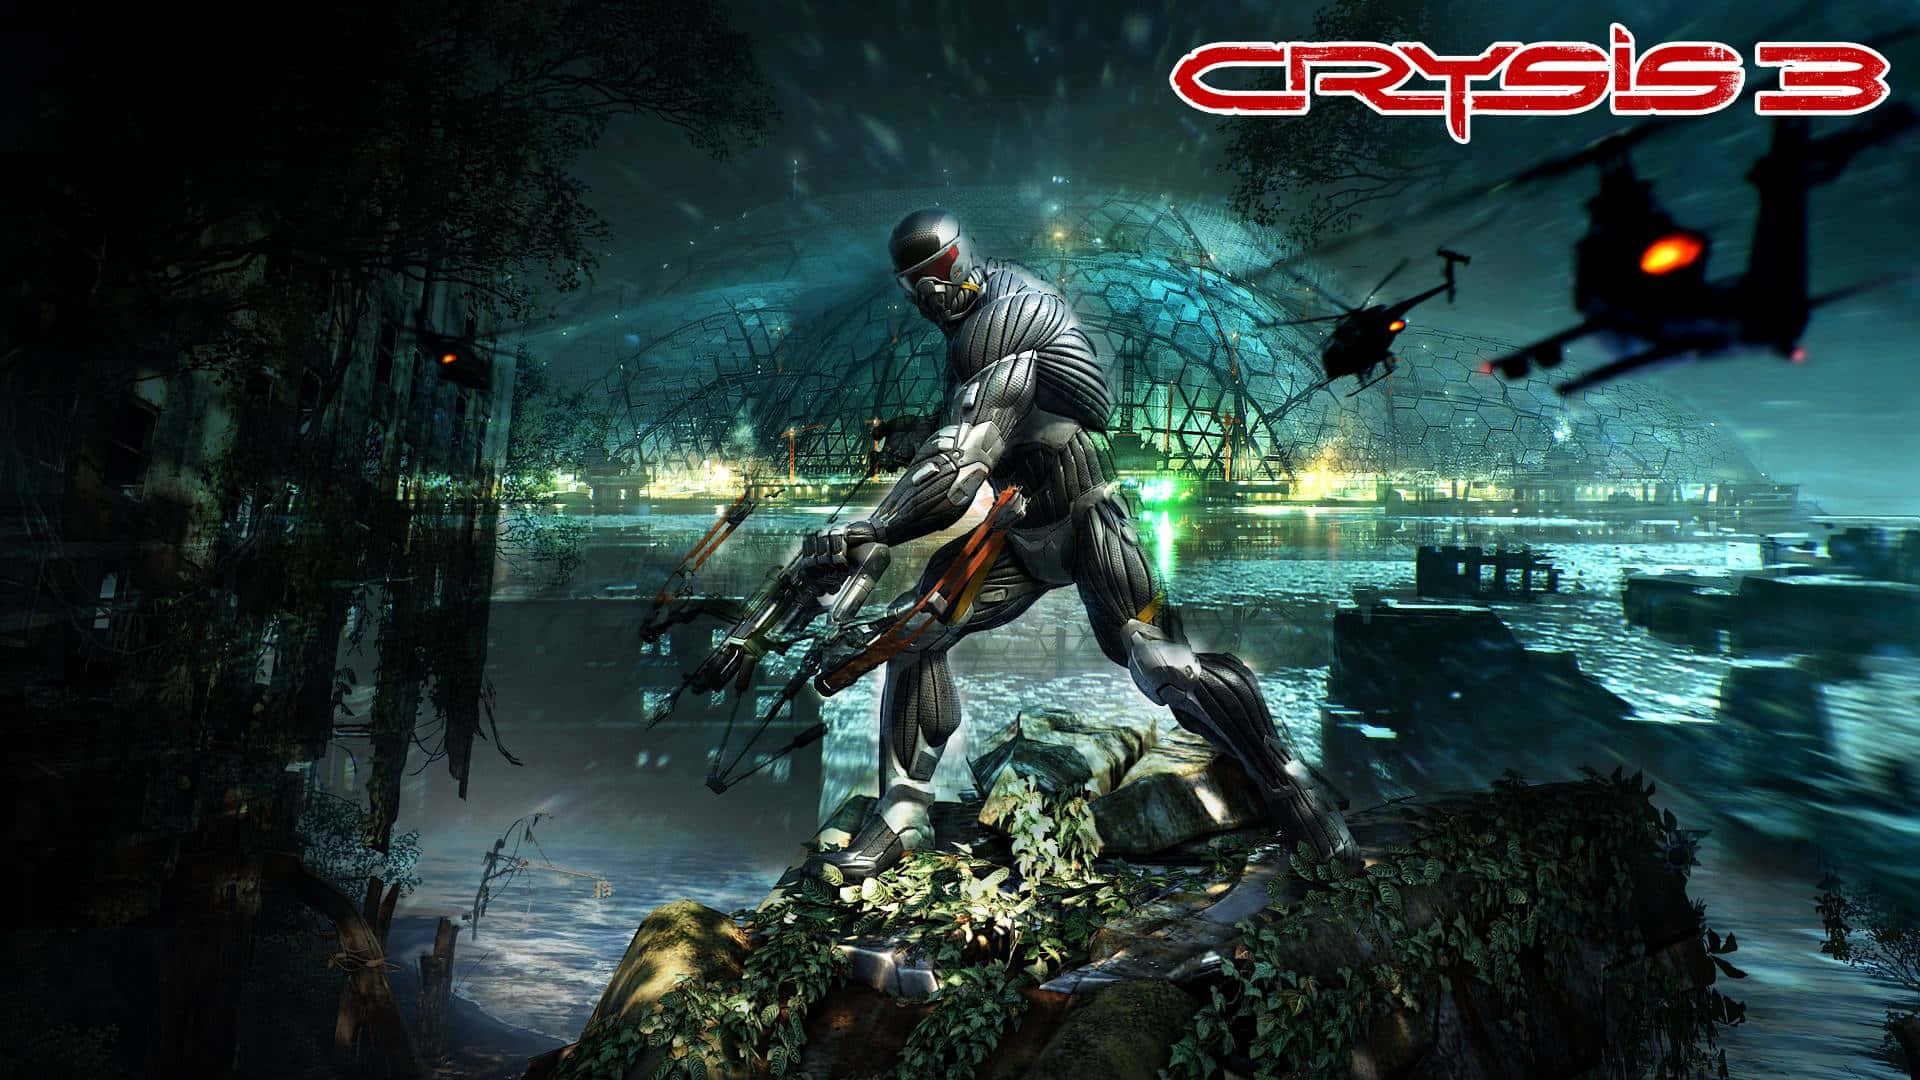 Explore the dangerous city of Crysis 3 and take back what’s yours. Wallpaper